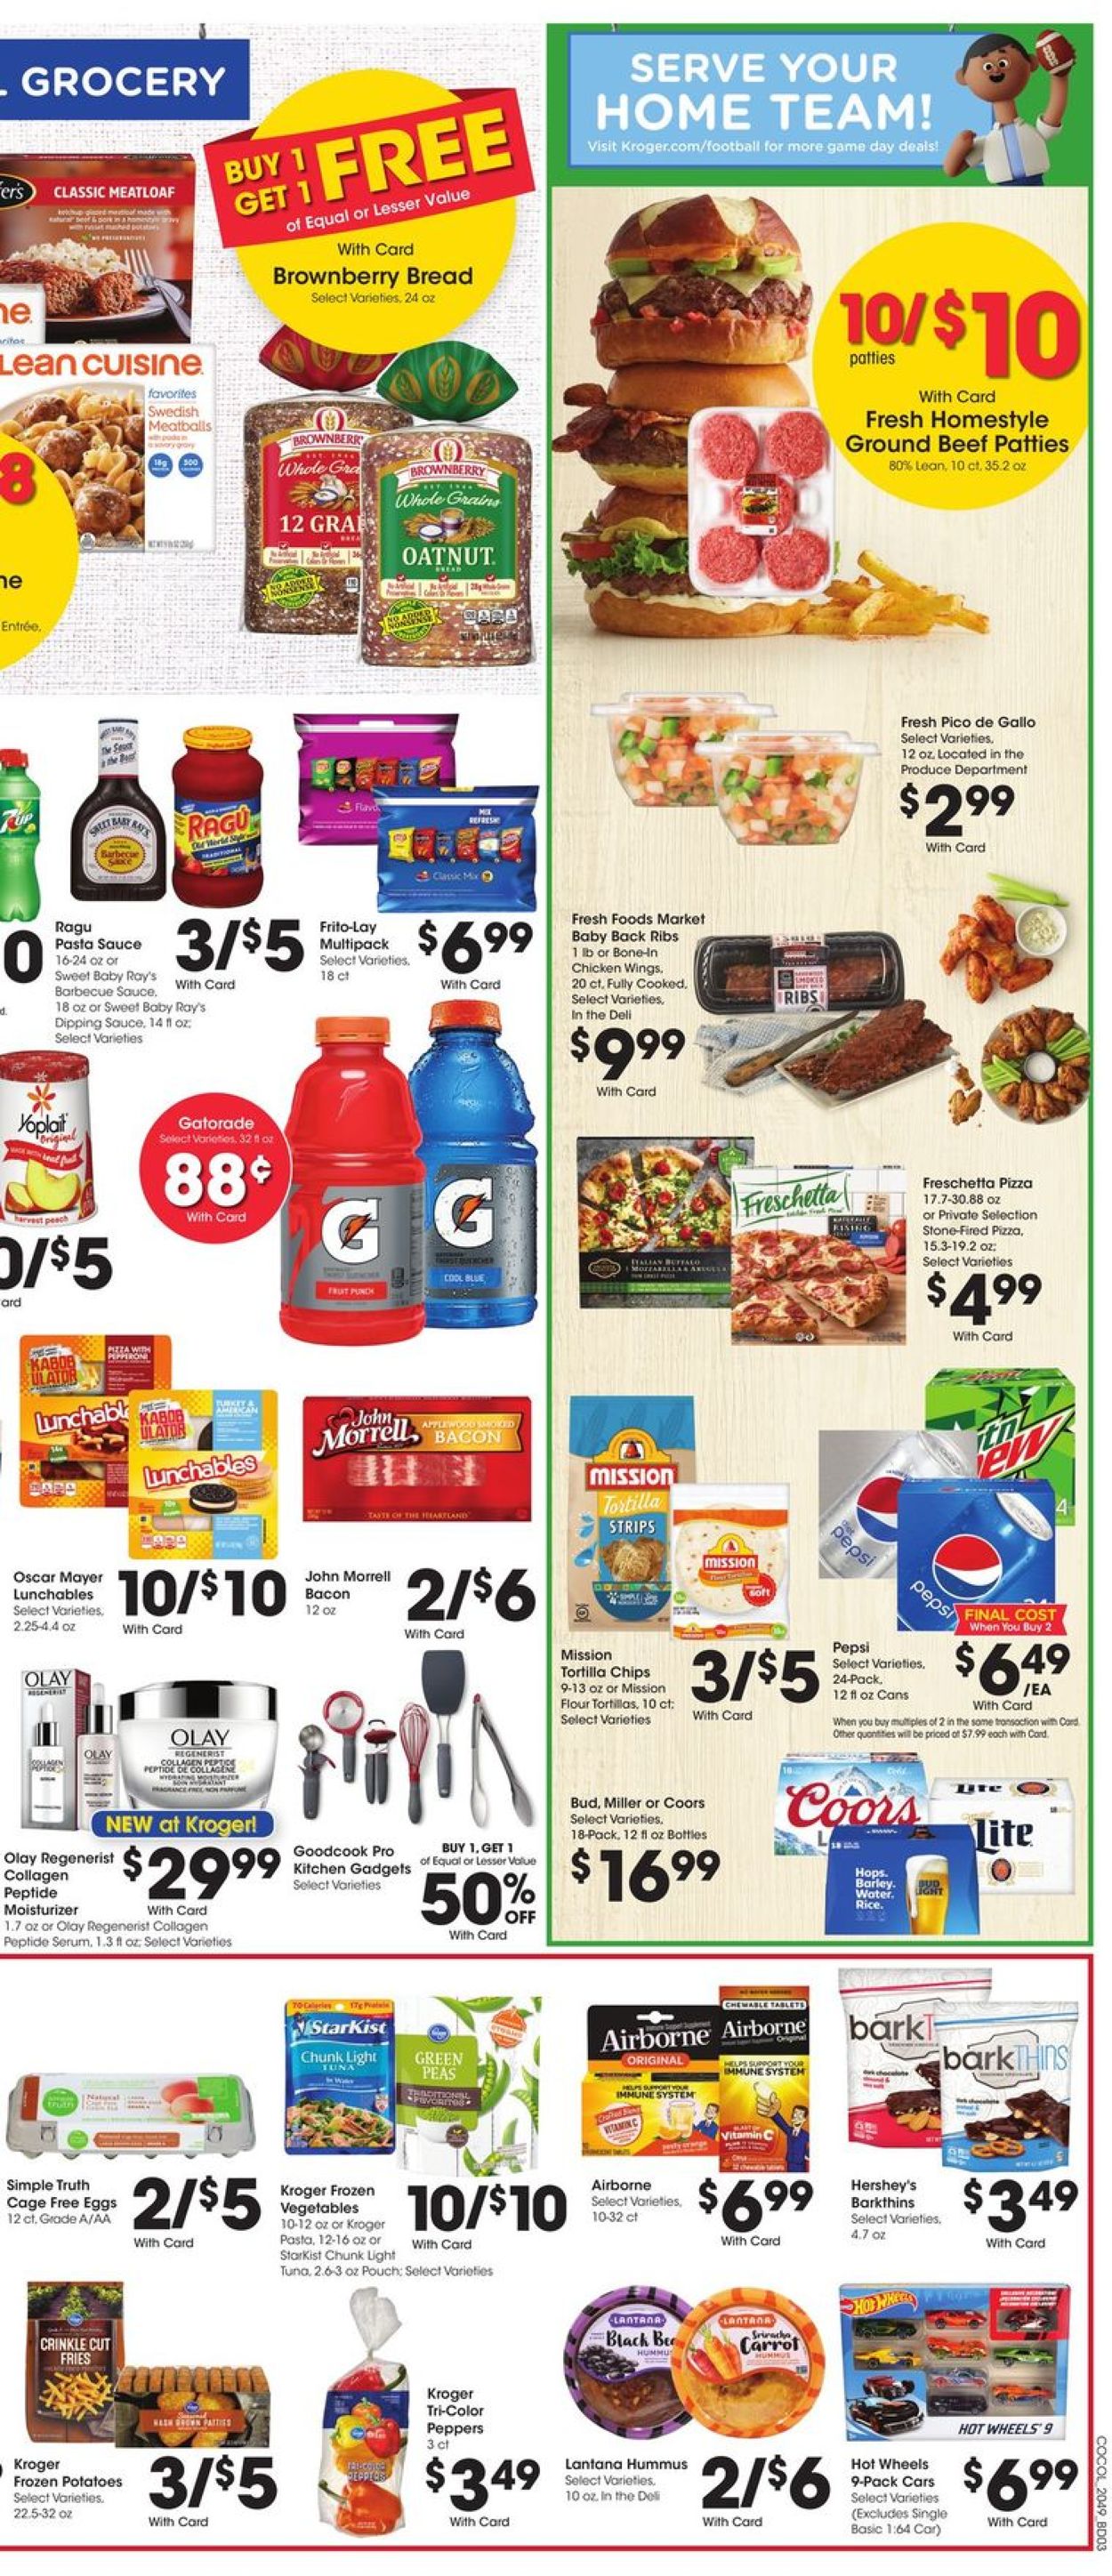 Kroger Current weekly ad 01/06 - 01/12/2021 [5] - frequent-ads.com